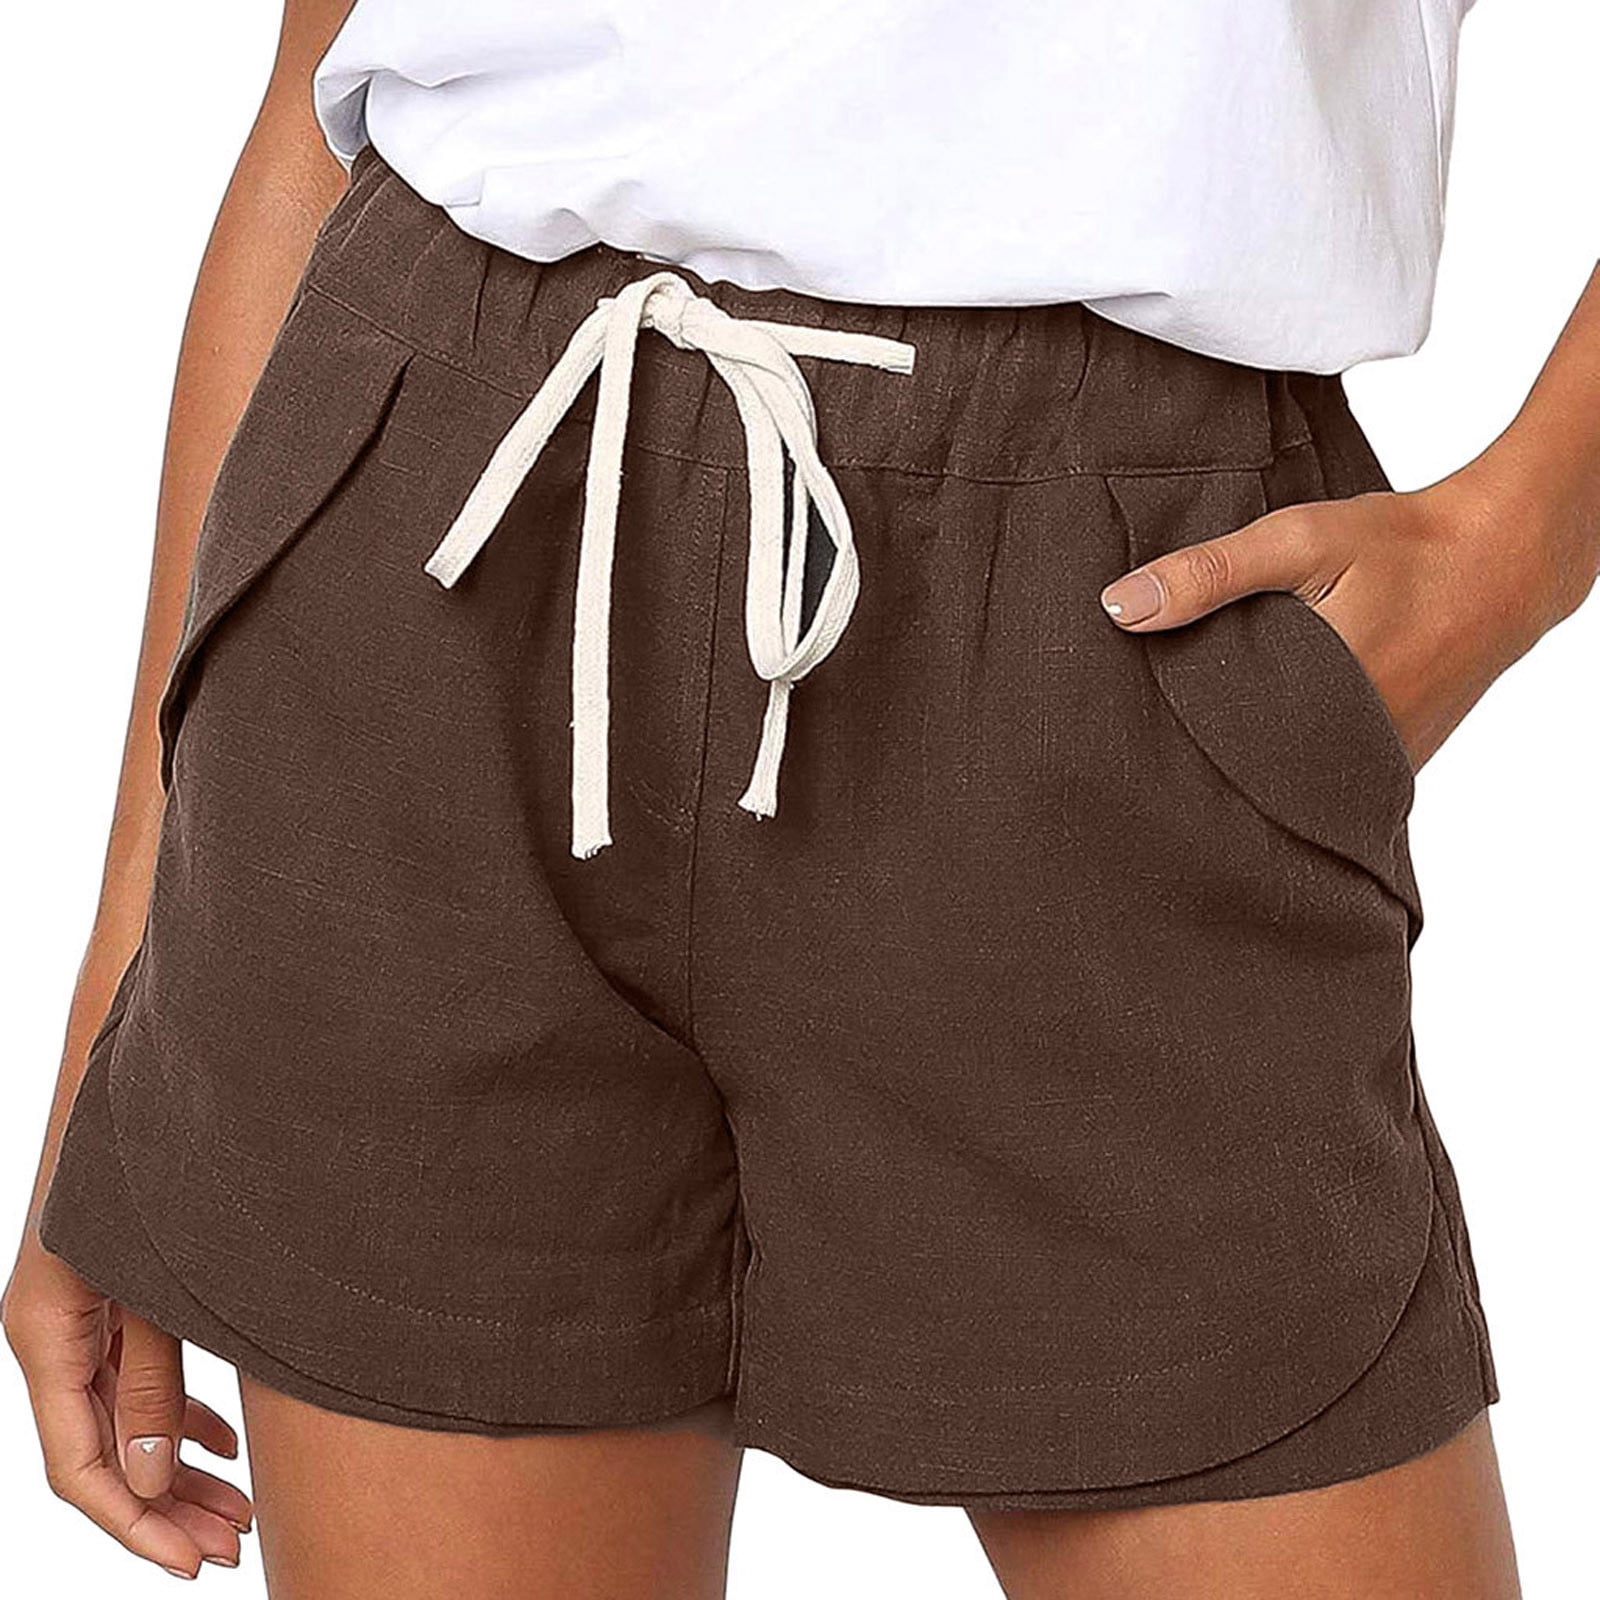 New Summer Fashion,POROPL Plus Size Pockets Elastic Waist Solid Shorts for Women  Casual Summer 7 Inch Inseam Clearance Beige Size 10 